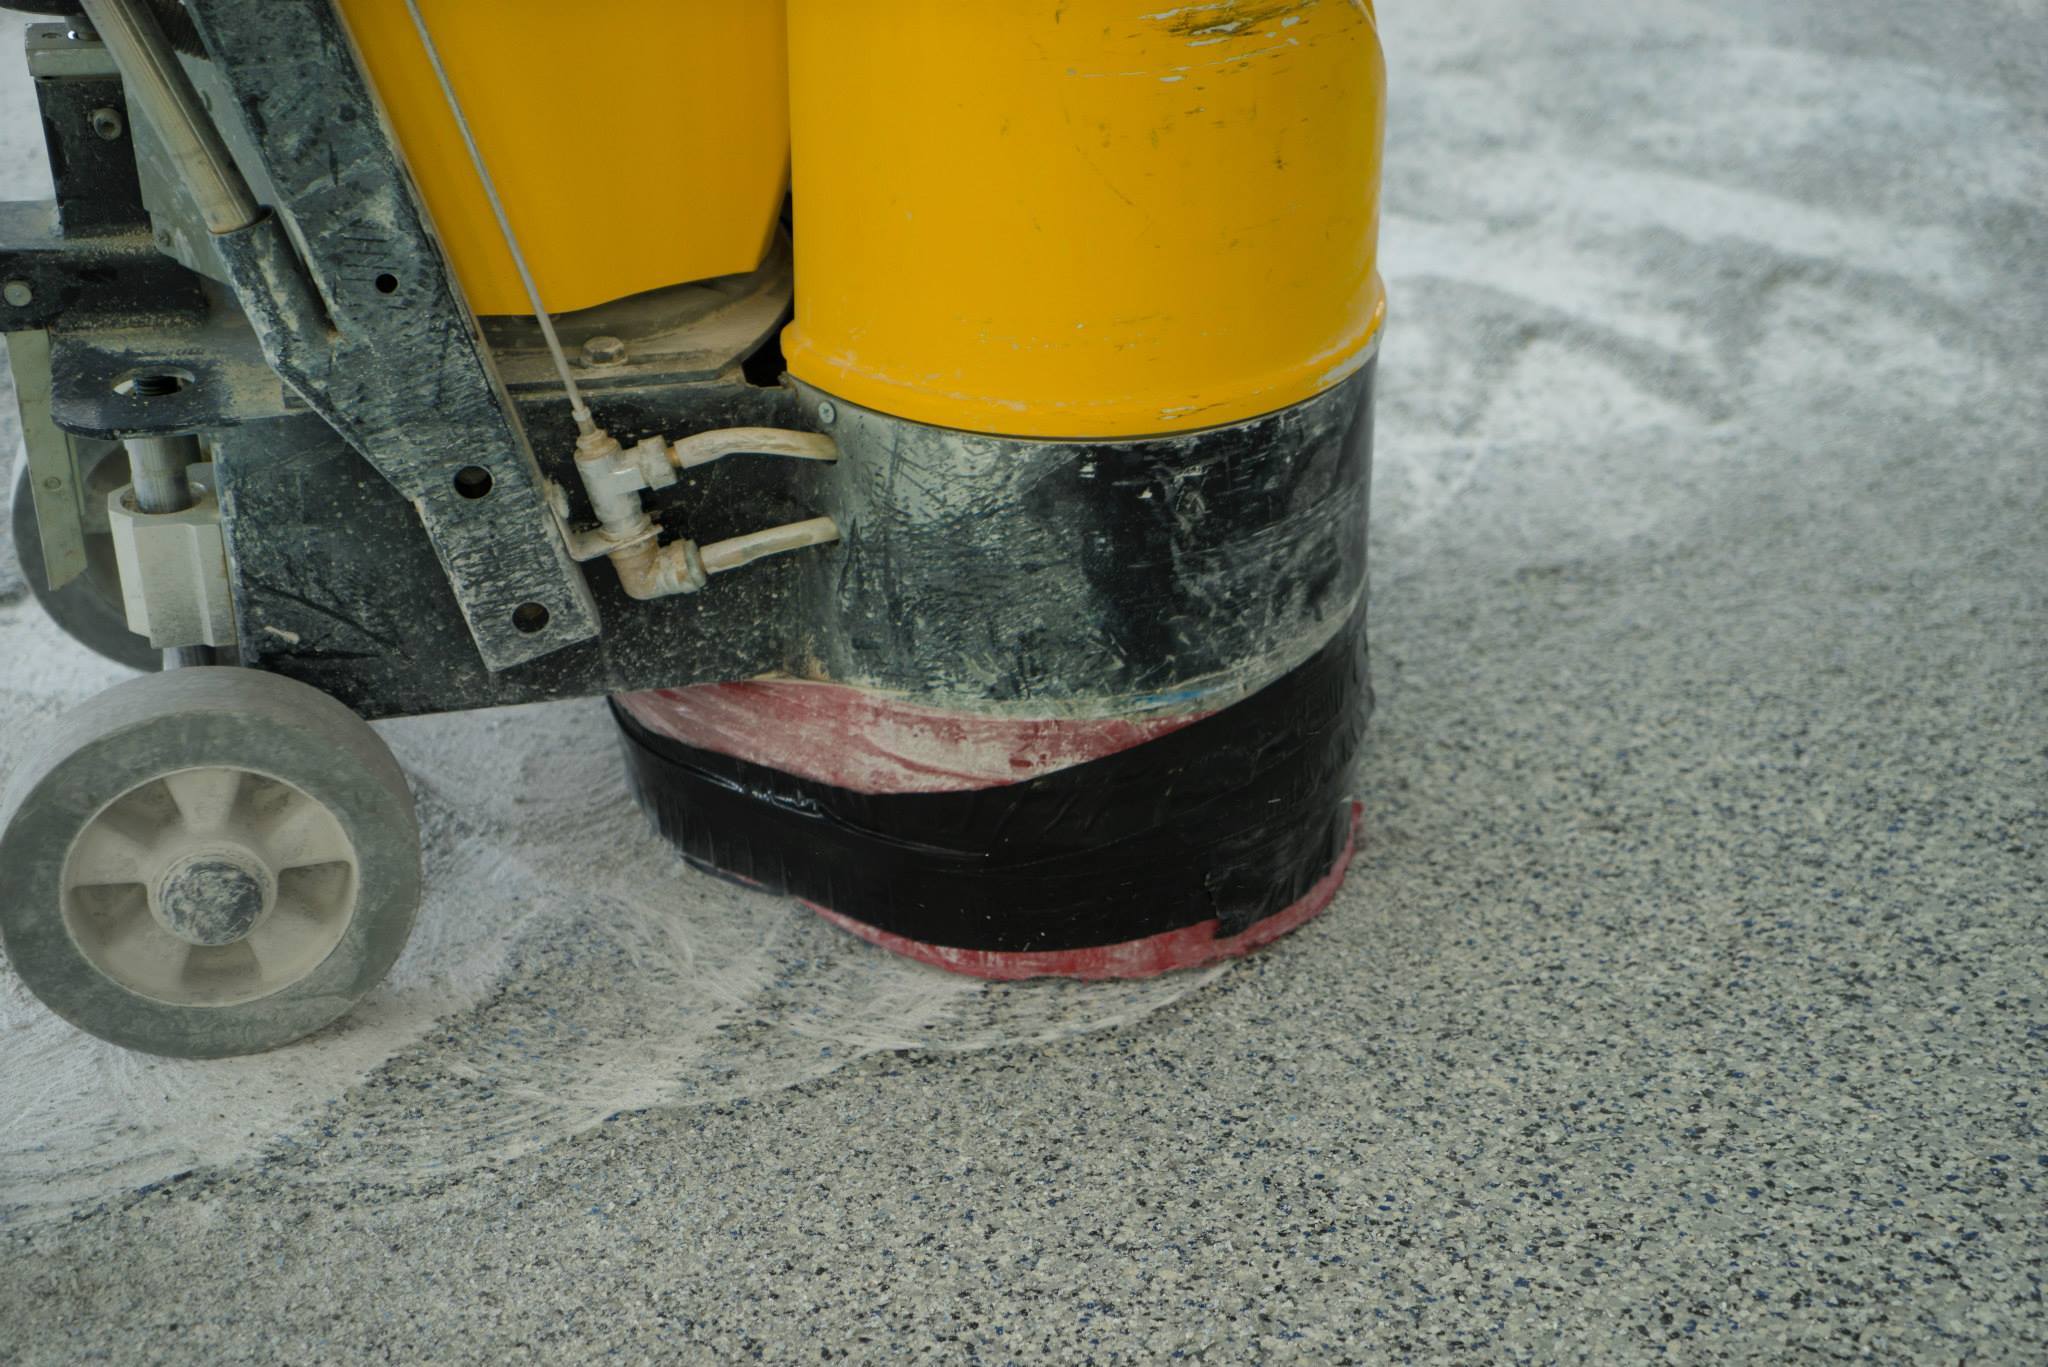 How to Properly Grind Concrete Floor Surfaces - Xtreme Polishing Systems